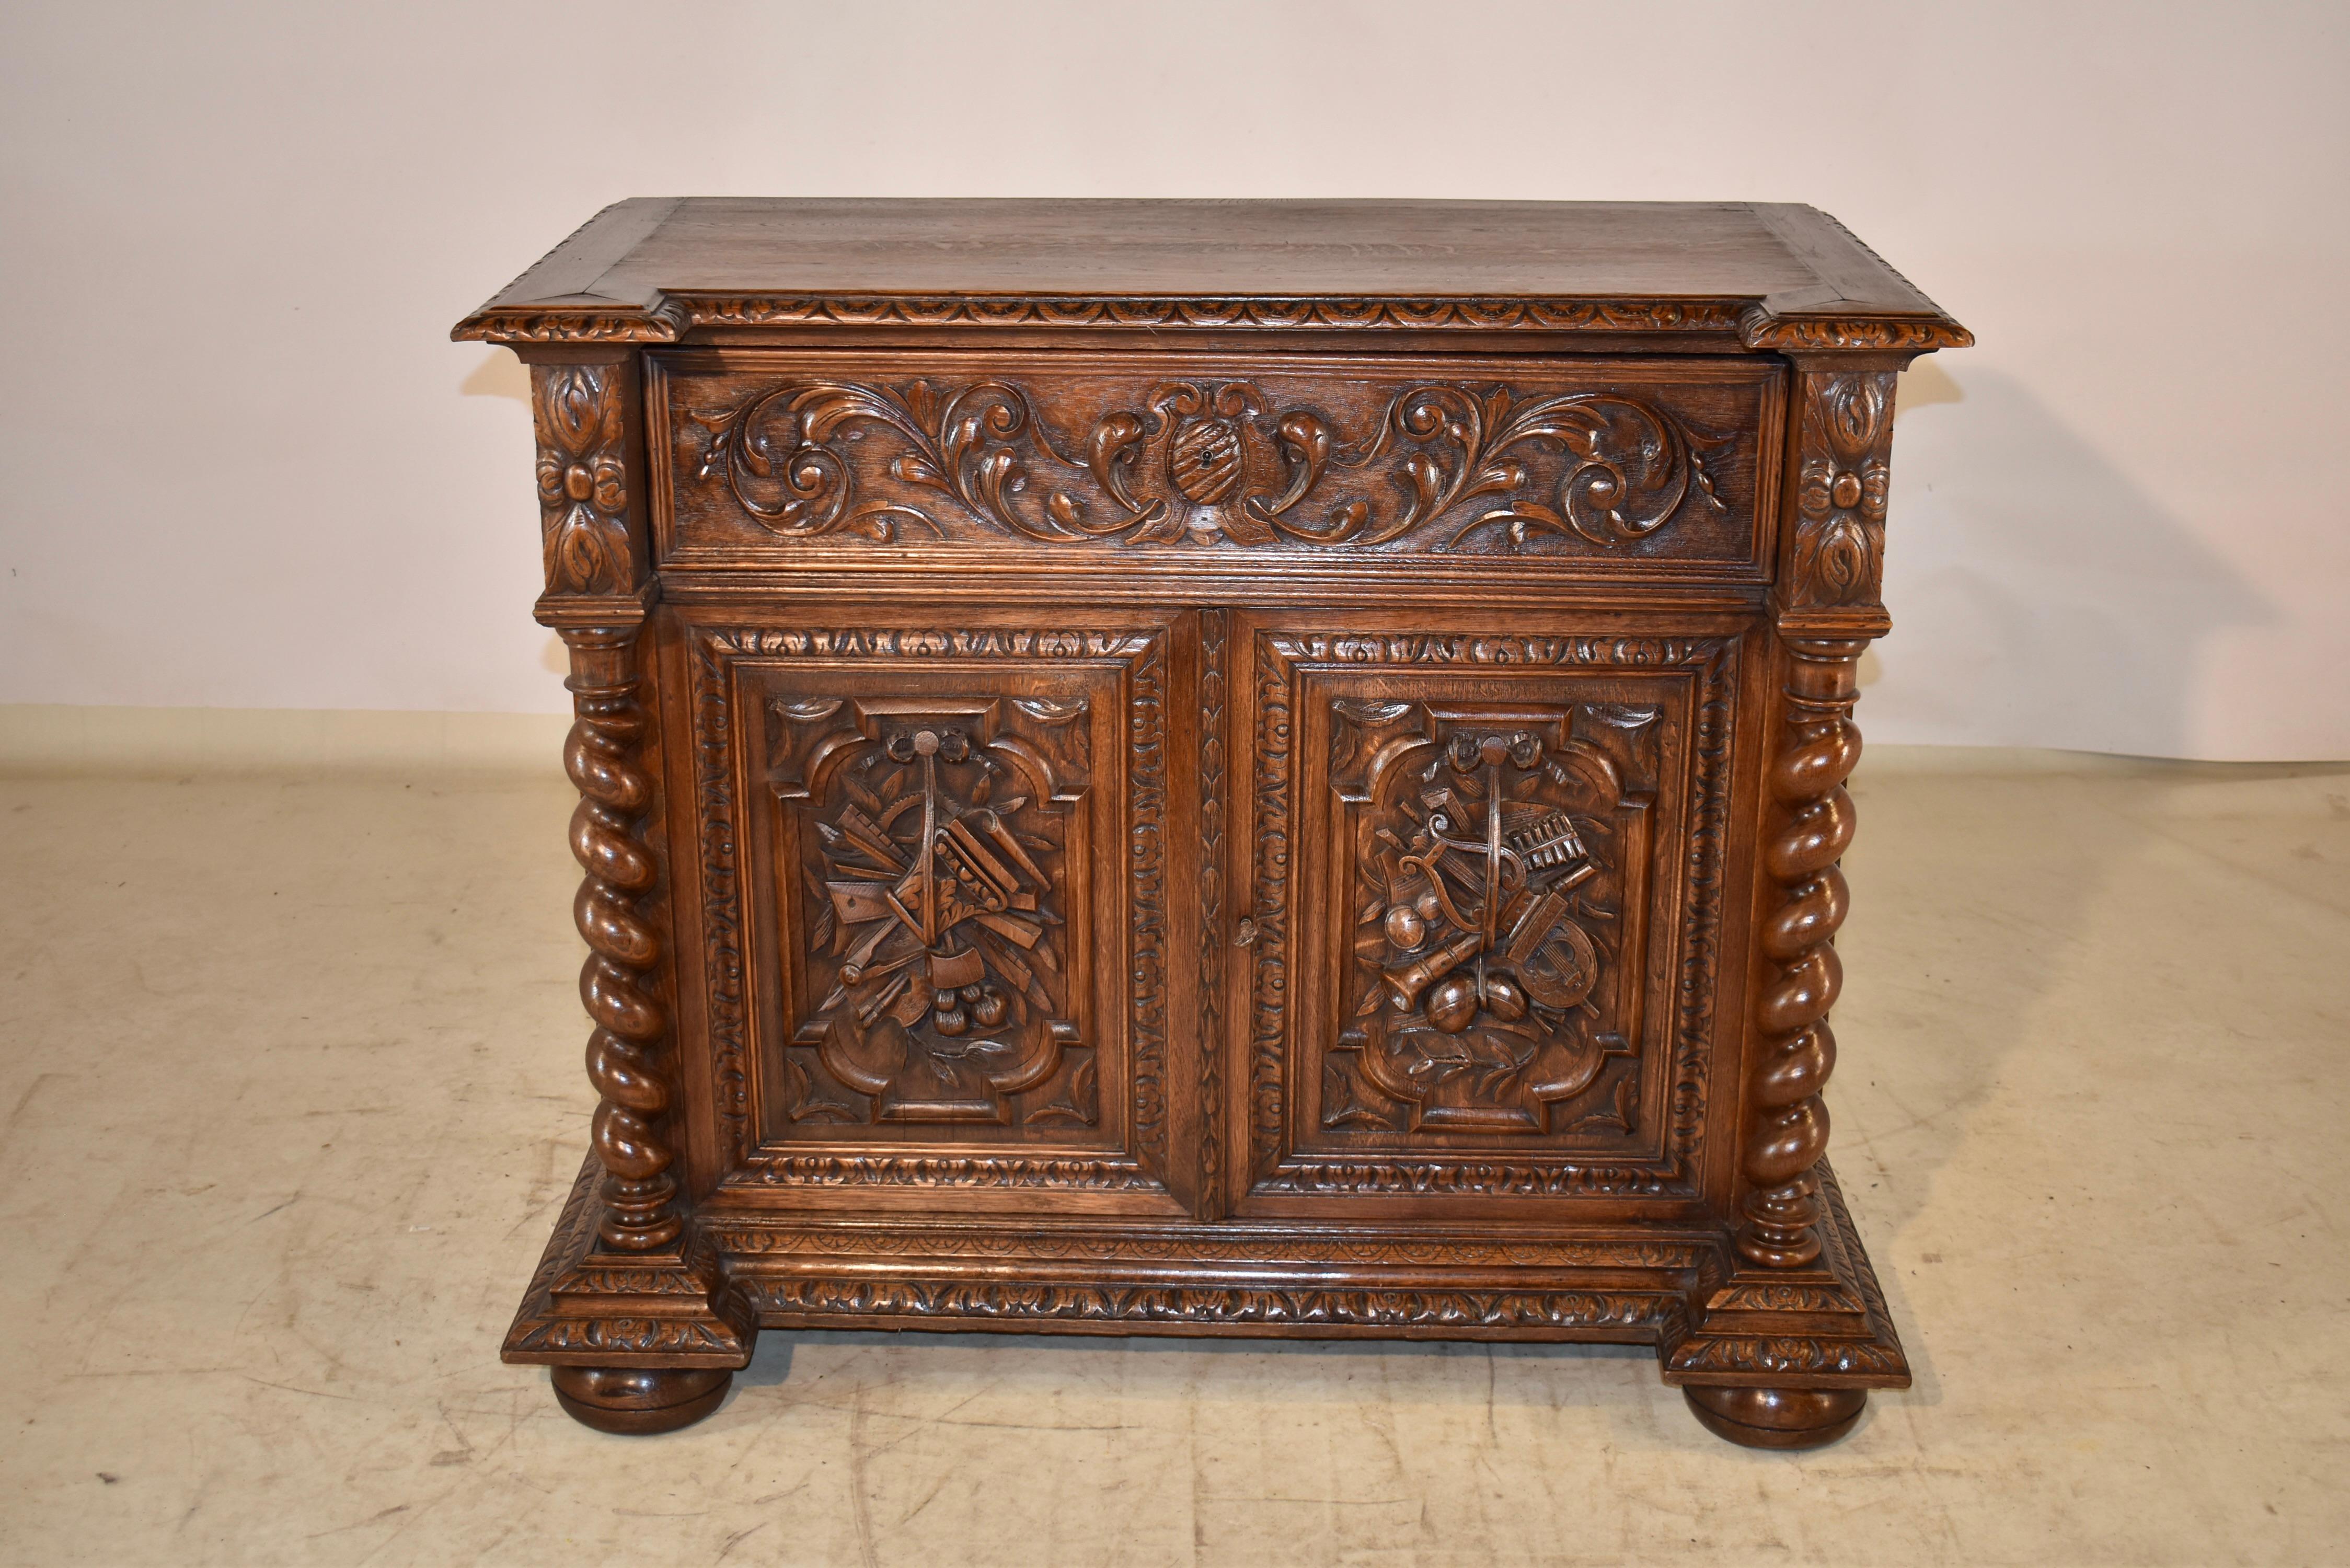 19th century oak buffet from France.  The top is banded and has a beveled and hand carved decorated edge, following down to paneled sides, which are hand carved decorated.  The front of the buffet is blocked and has a single drawer, which is paneled